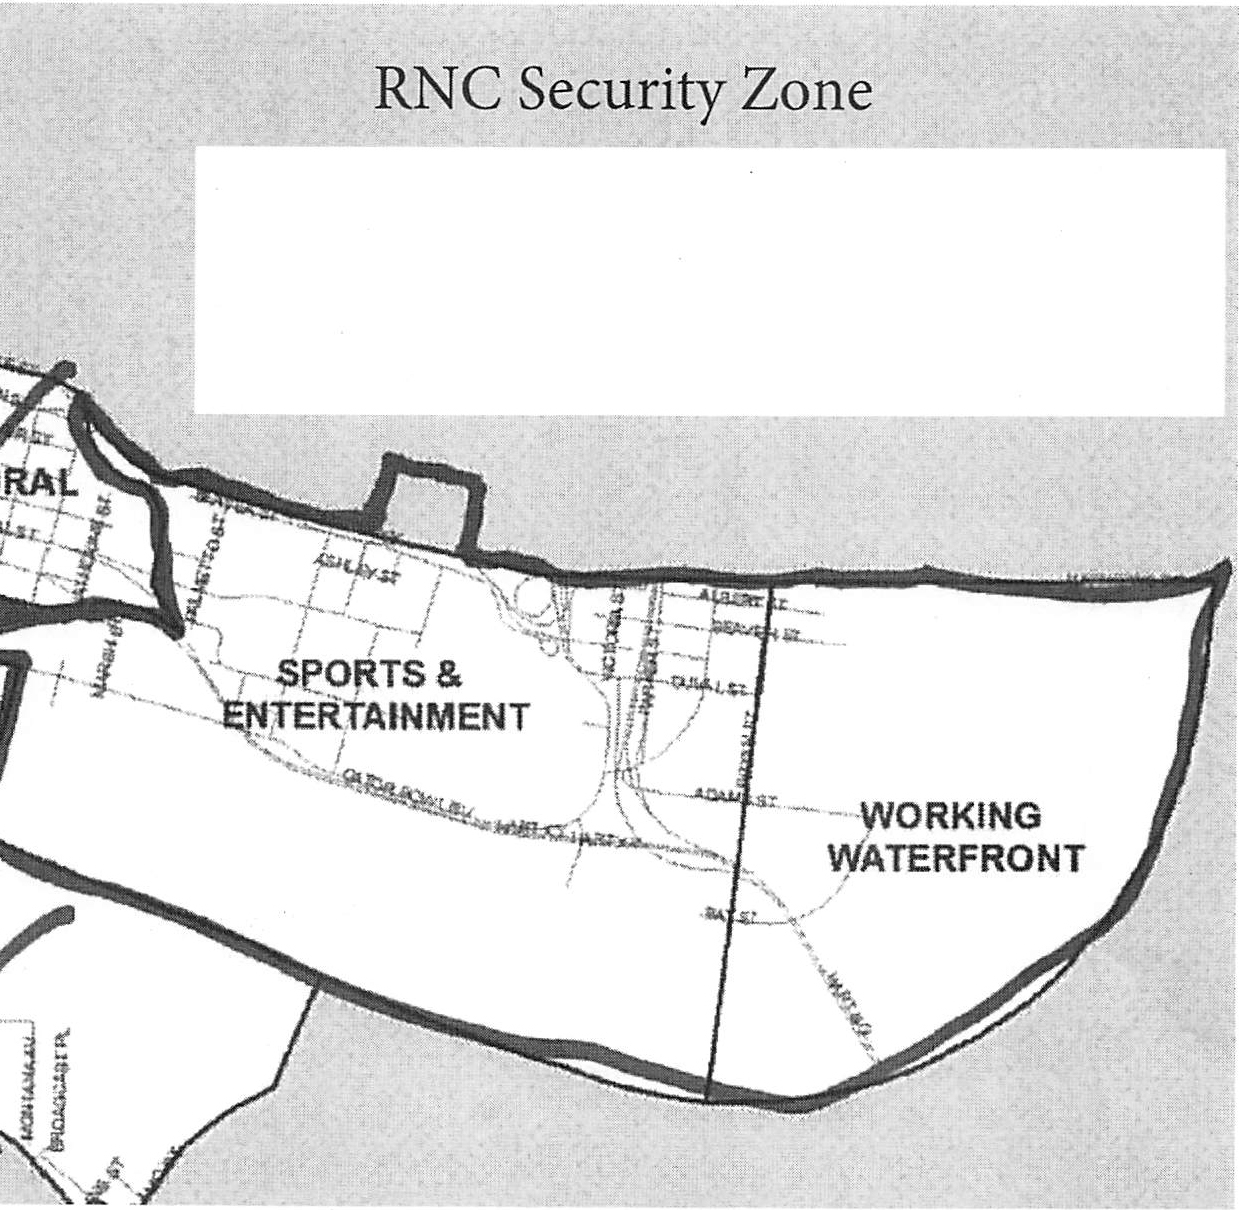 The map of the RNC Security Zone included as an exhibit in the bill seeking Council approval for its creation. The blank area is part of the exhibit.